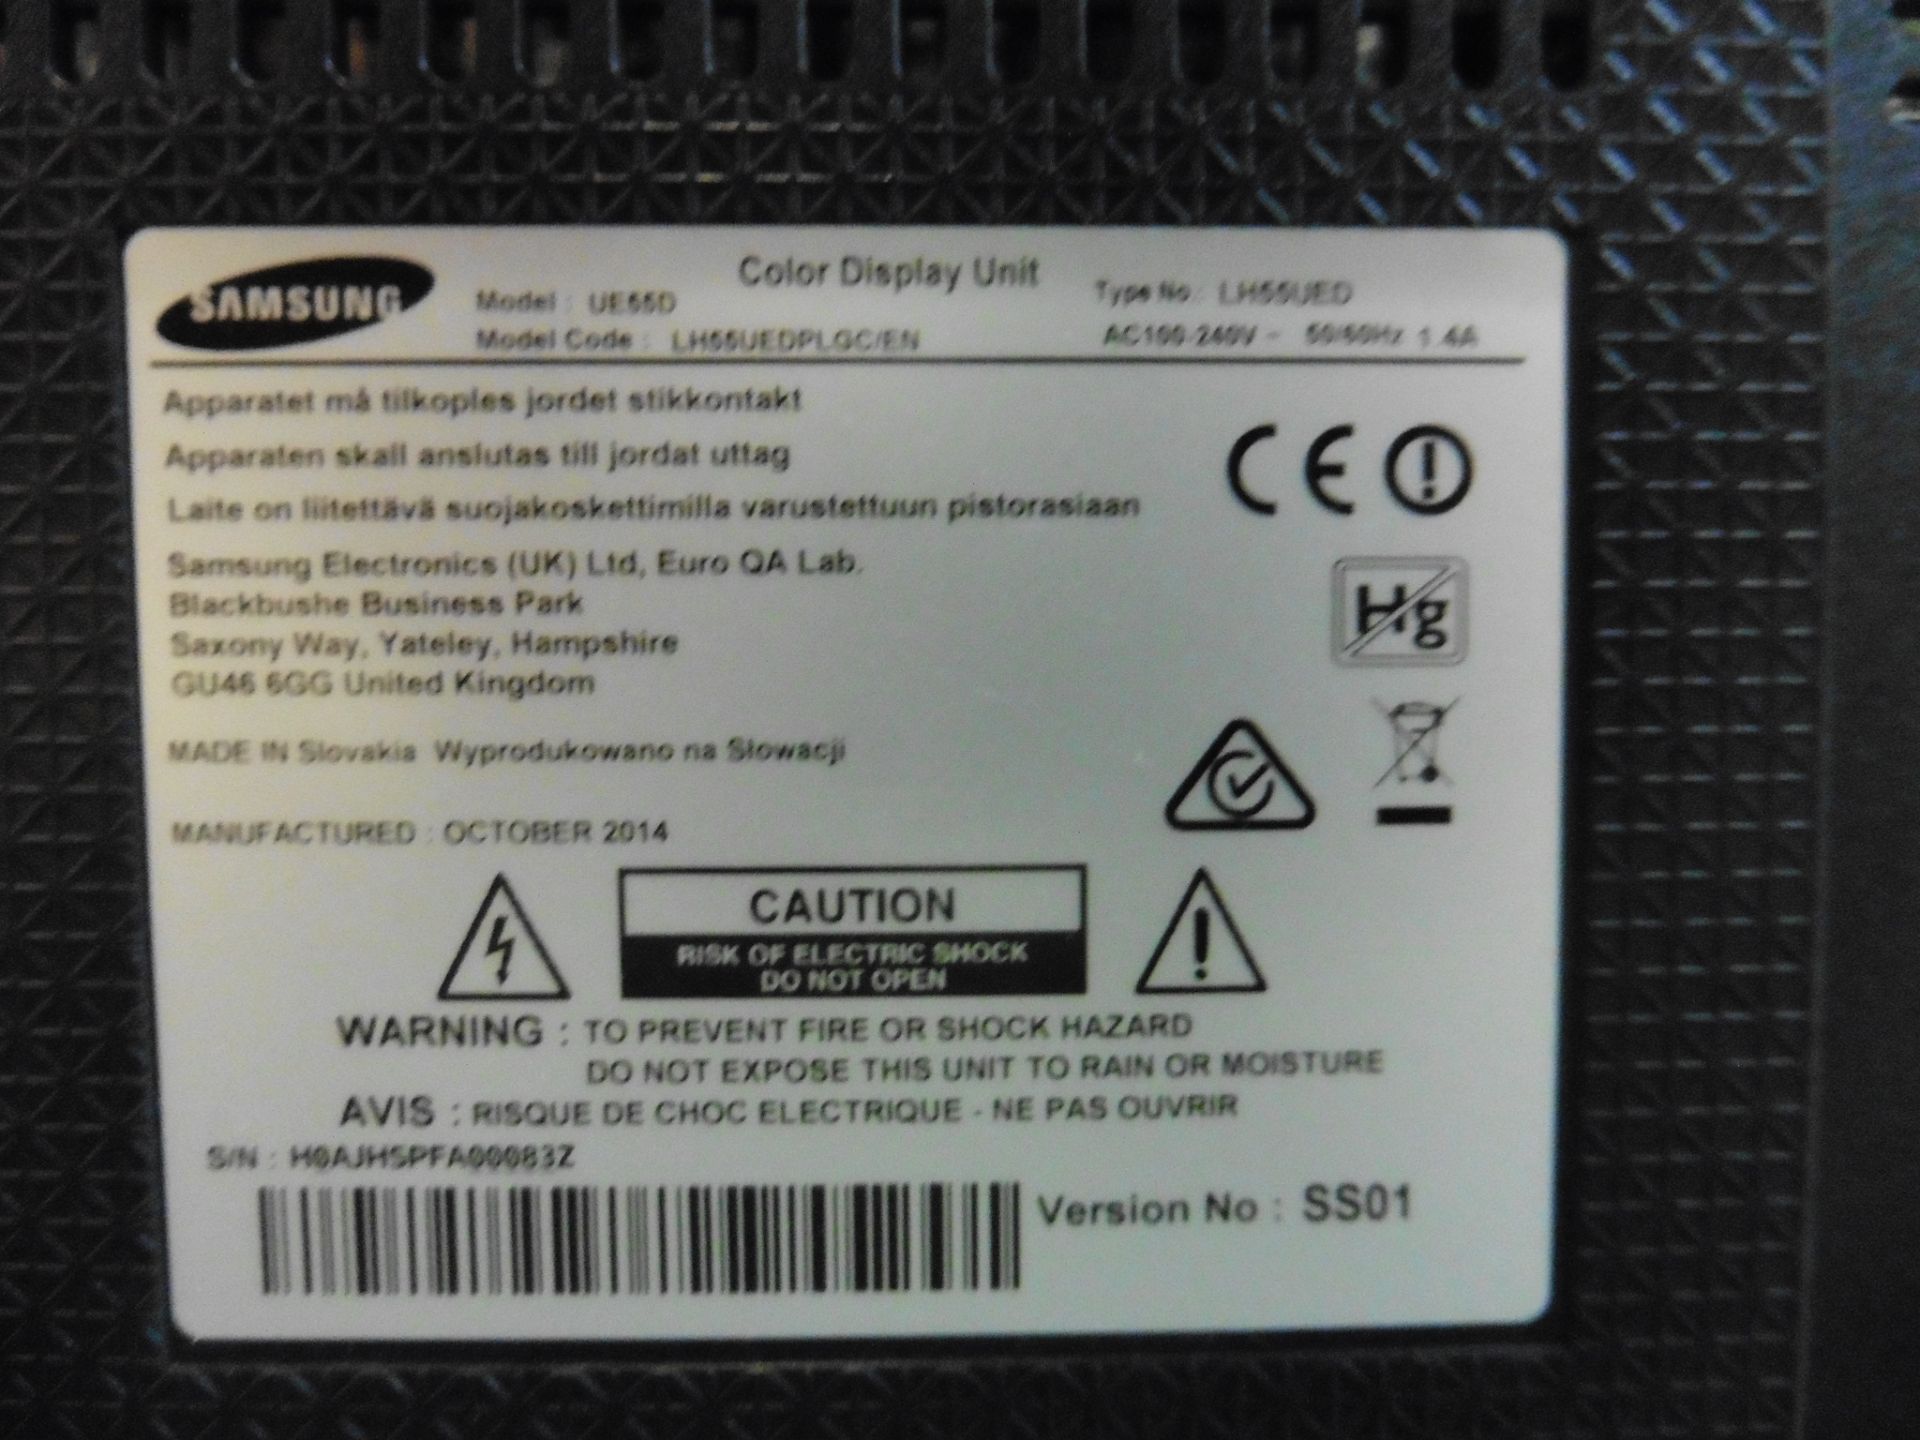 Samsung model UE55D colour display screen with remote (manufactured 2014) - Image 2 of 2